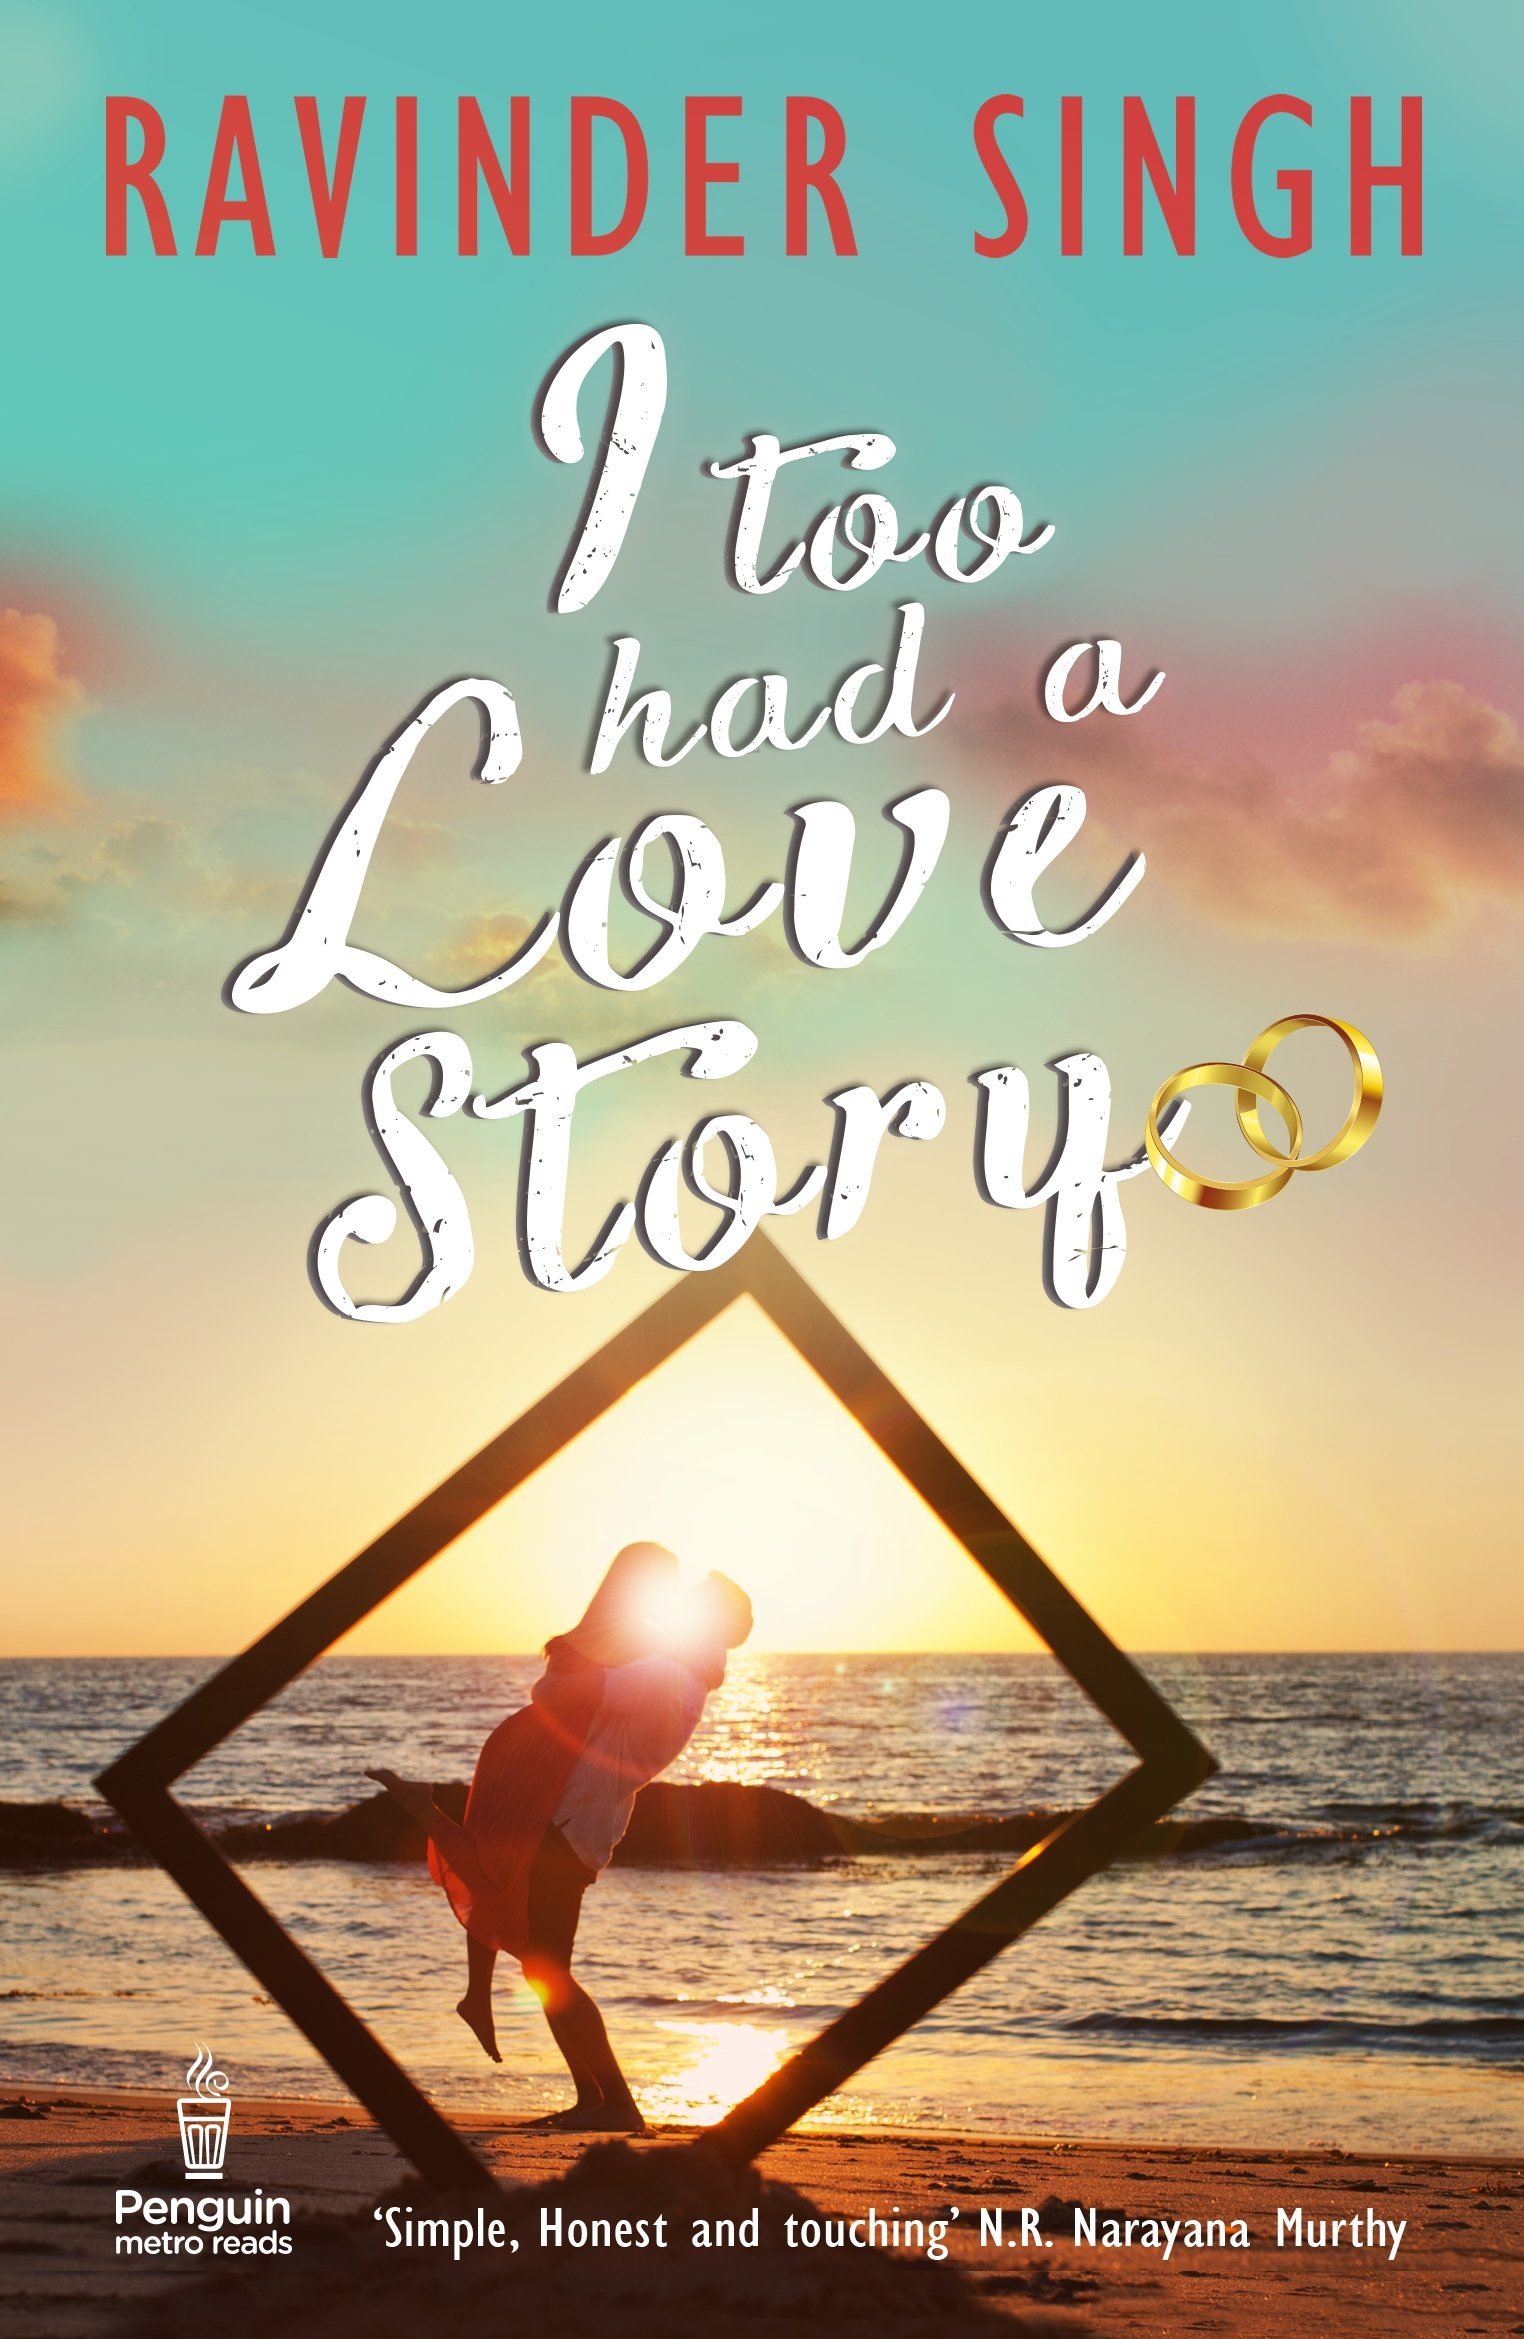 i hate love story 720p torrent